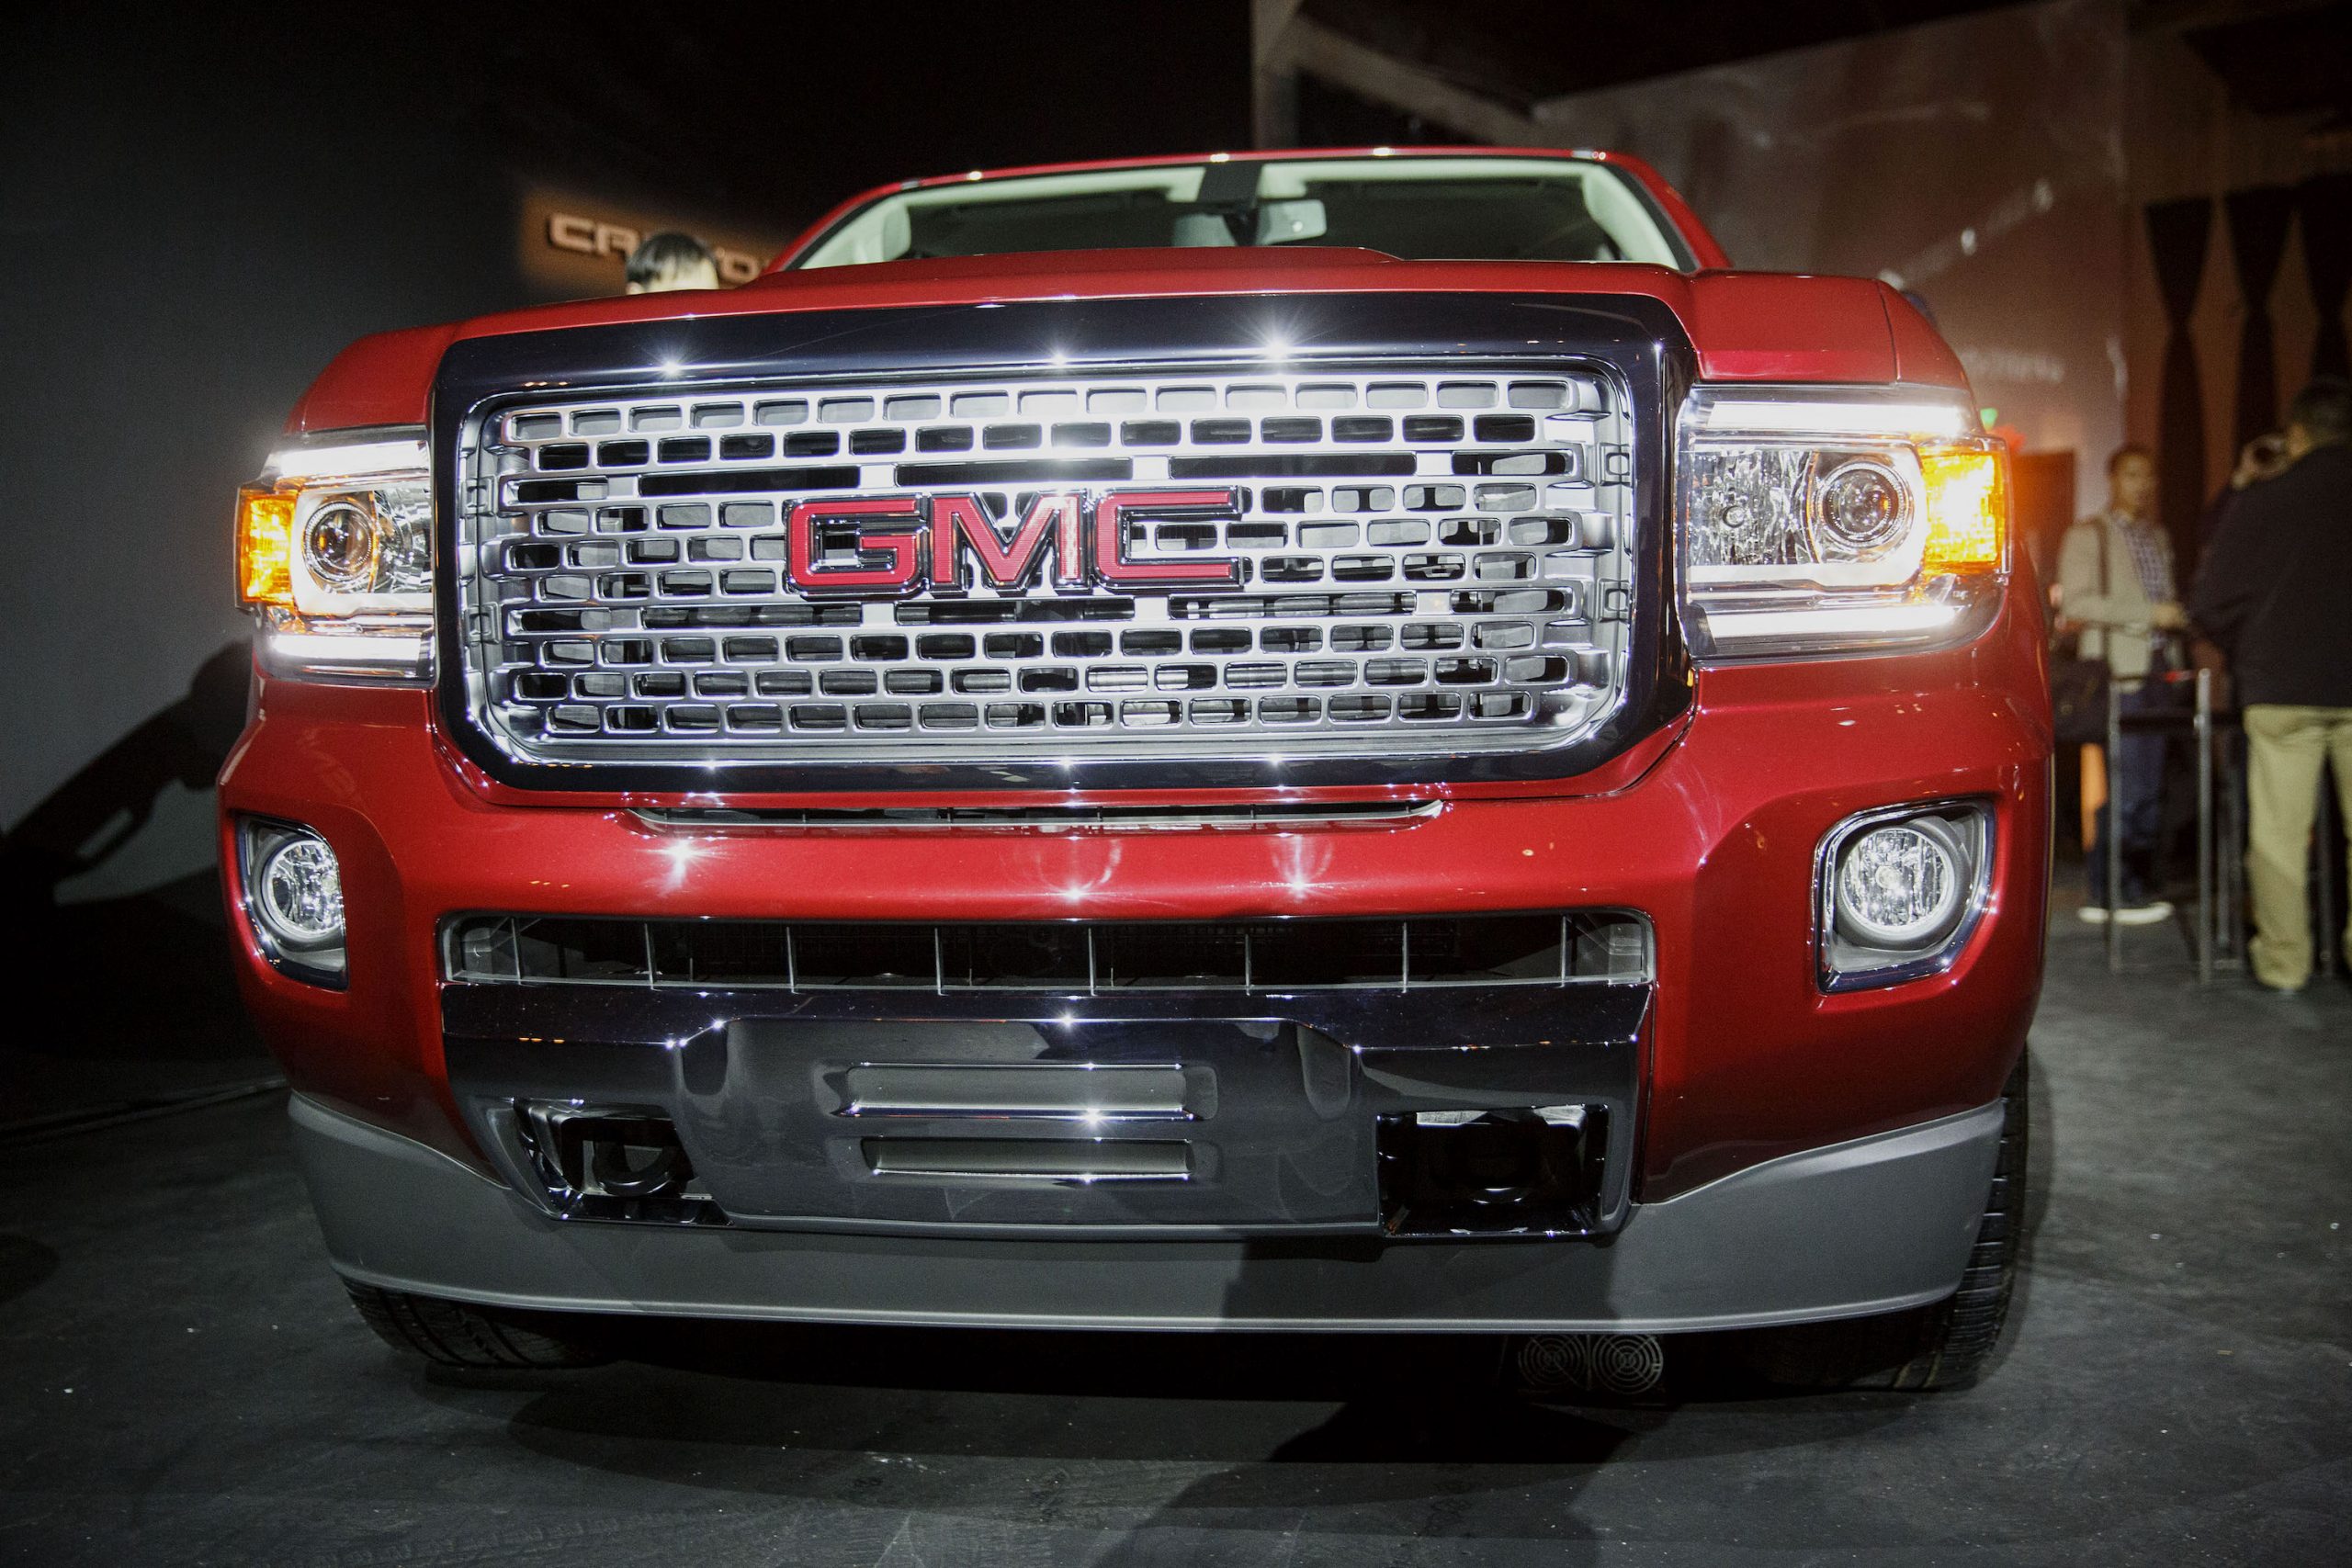 The red General Motors Co. (GM) GMC 2017 Canyon Denali truck is displayed during an event ahead of the Los Angeles Auto Show